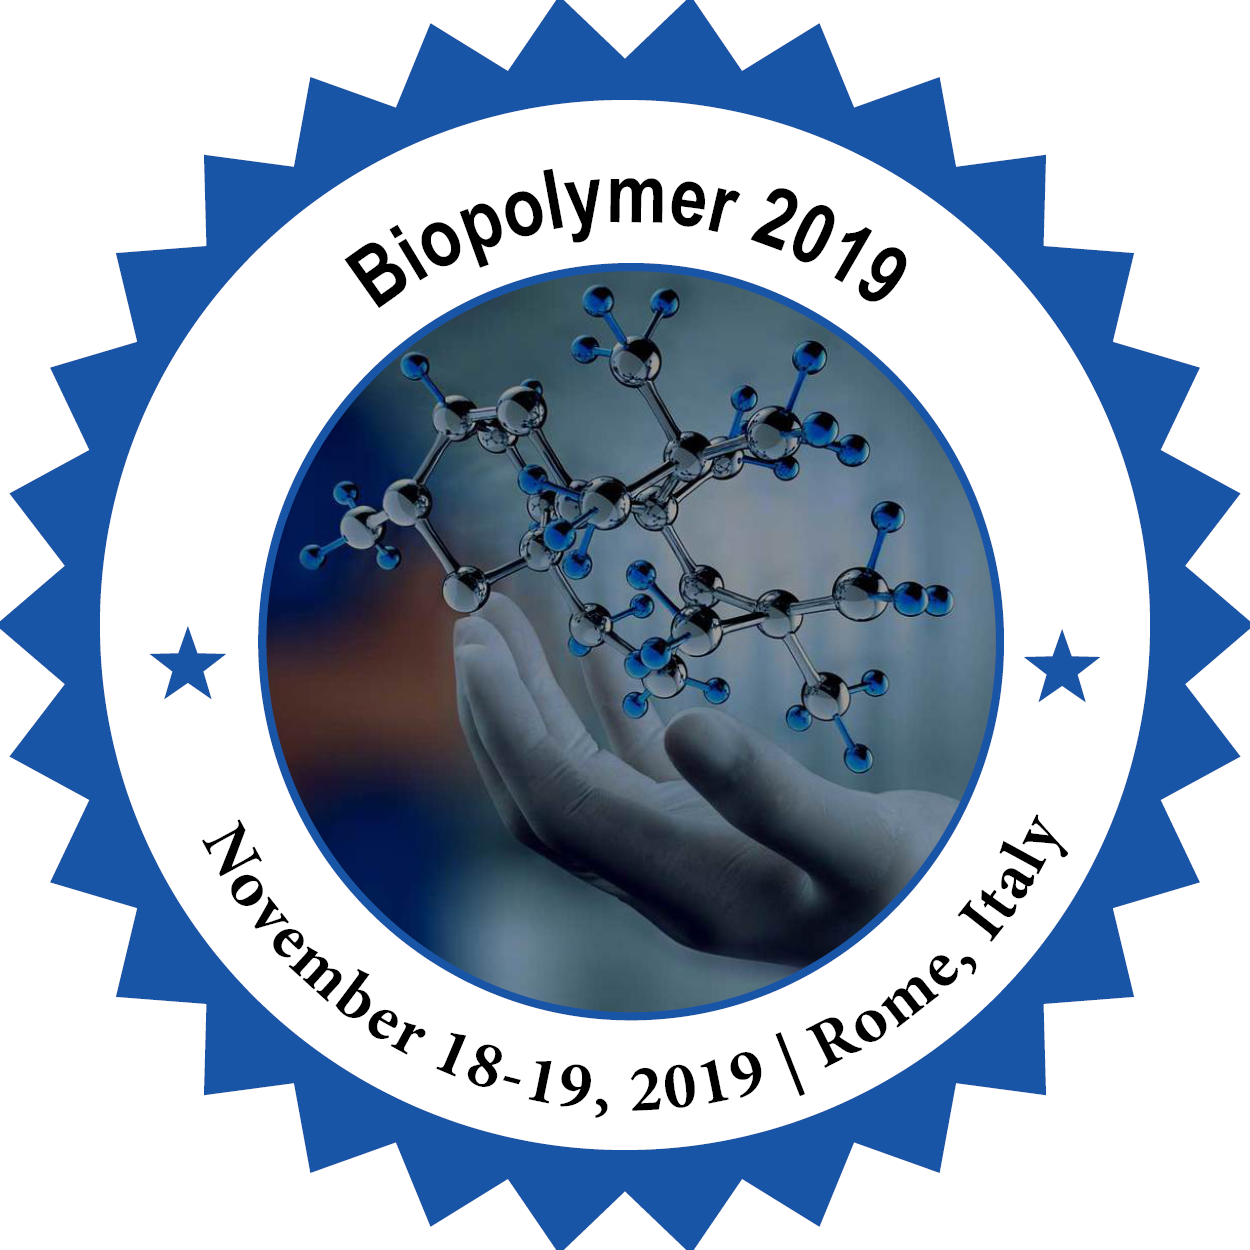 Frontiers in Polymer Chemistry and Biopolymers